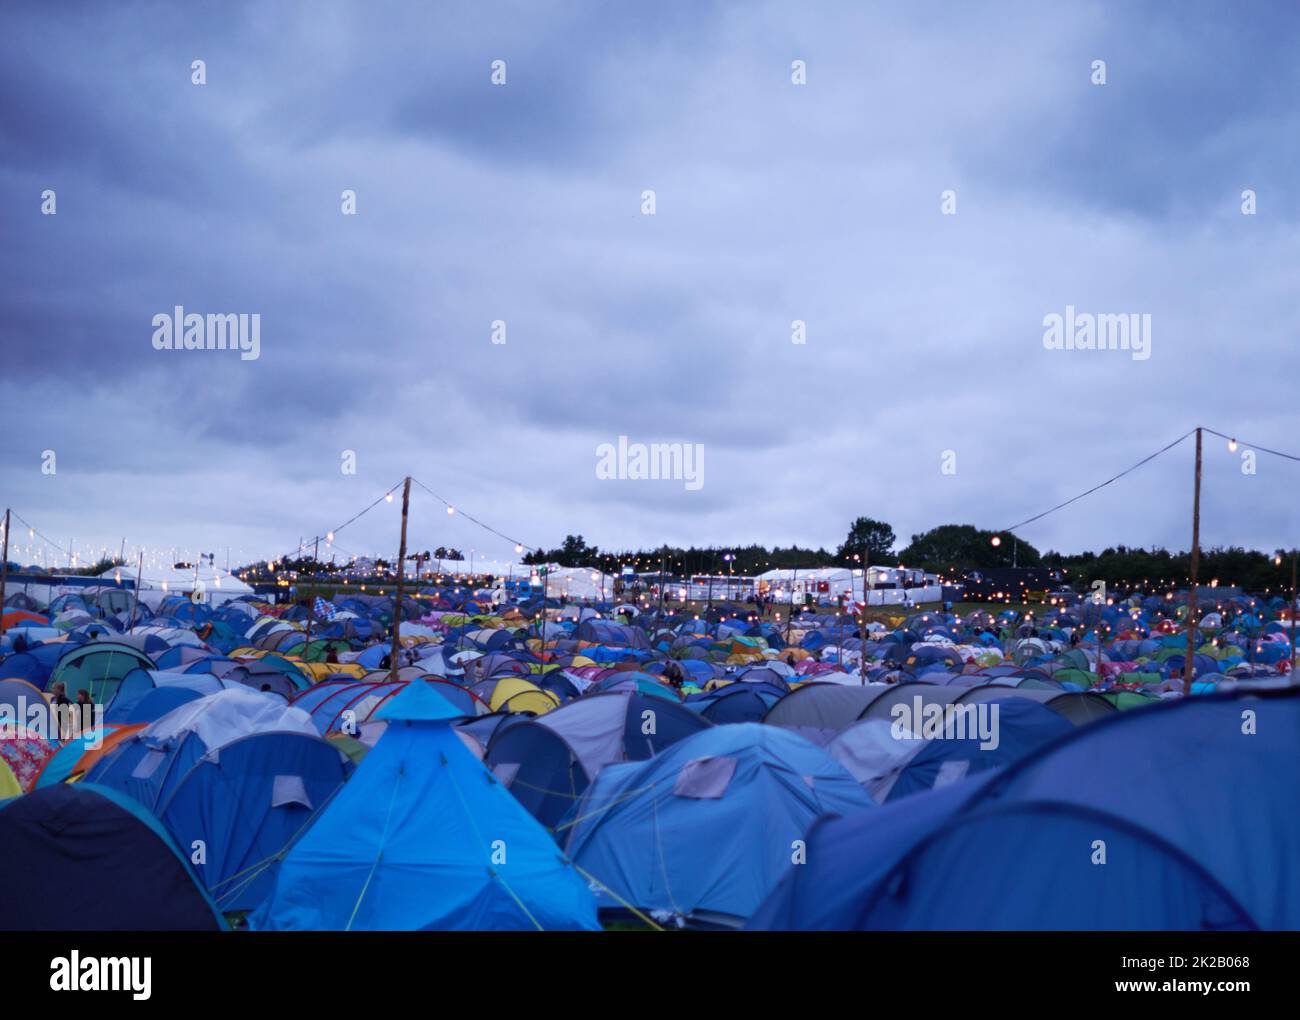 This festival is going to be intents. Cropped shot of various tents set up at an outdoor festival. Stock Photo